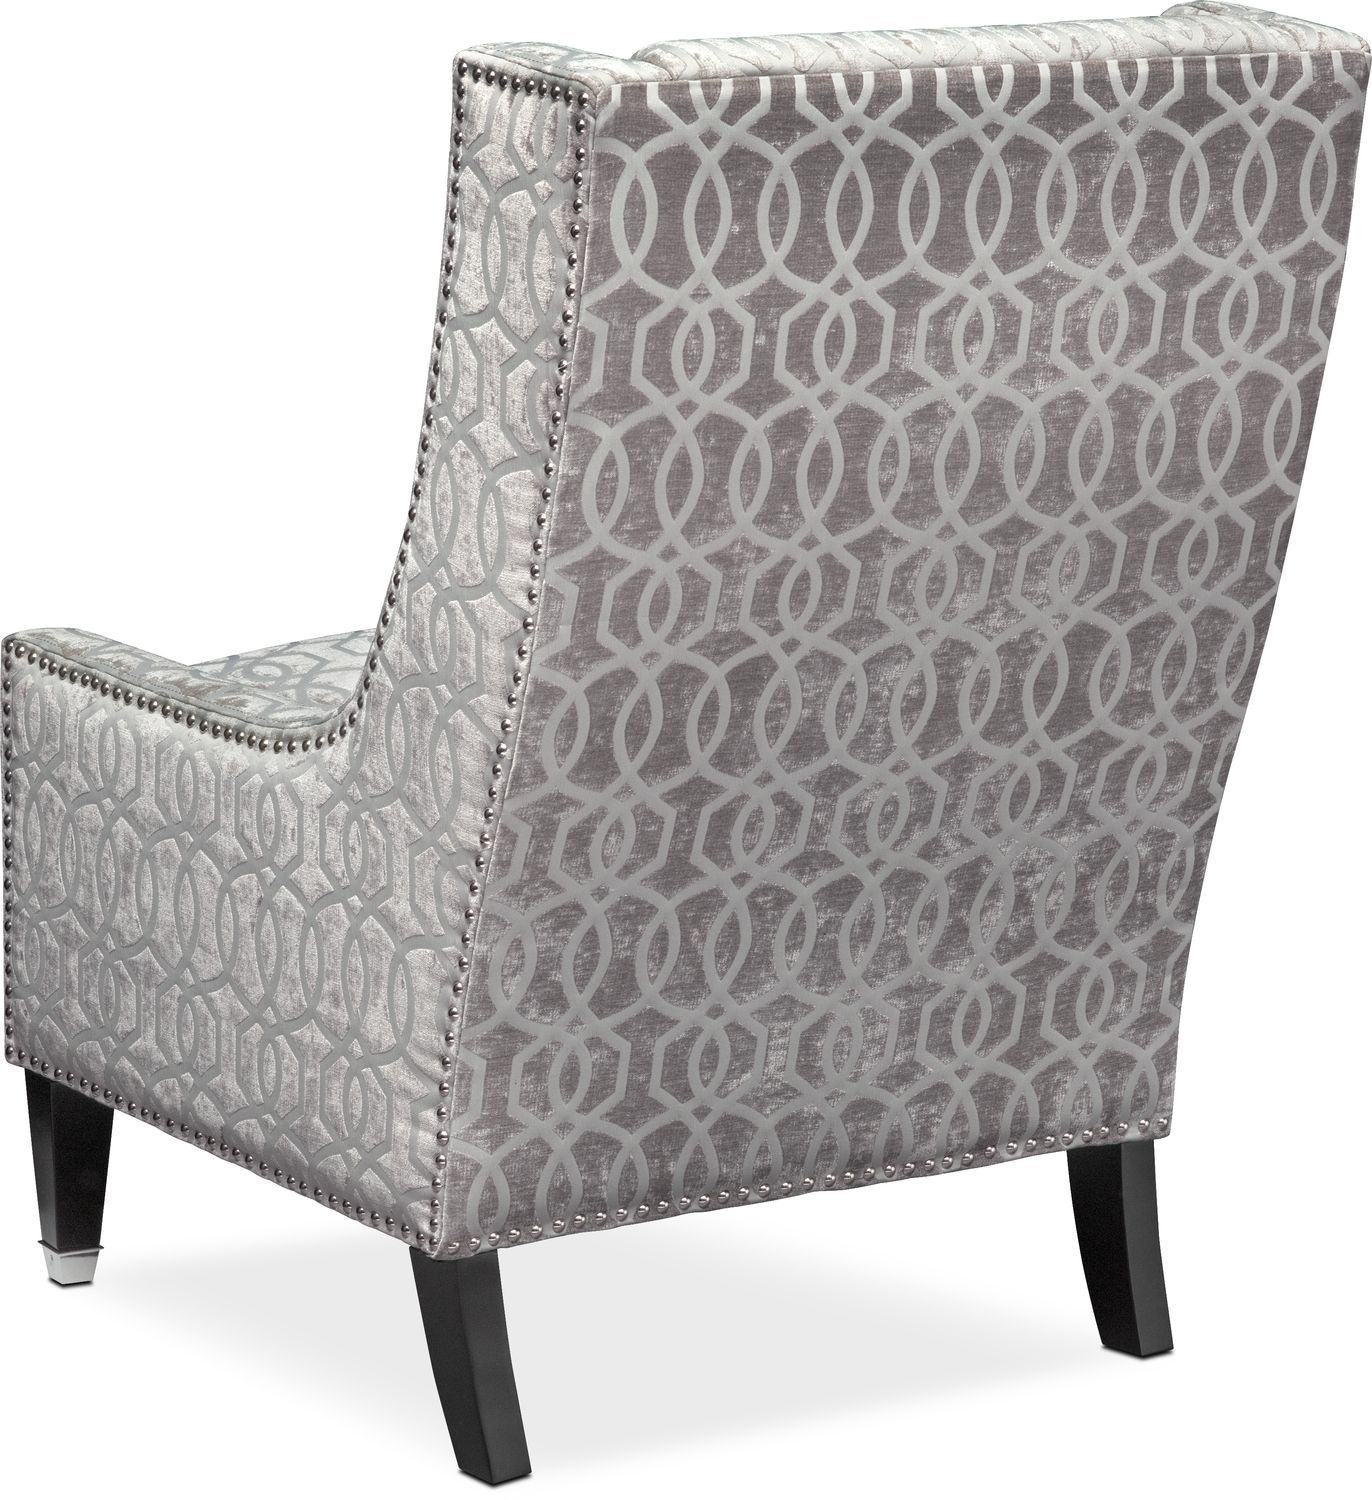 Accent Chairs | Value City Pertaining To Loft Black Swivel Accent Chairs (View 3 of 25)